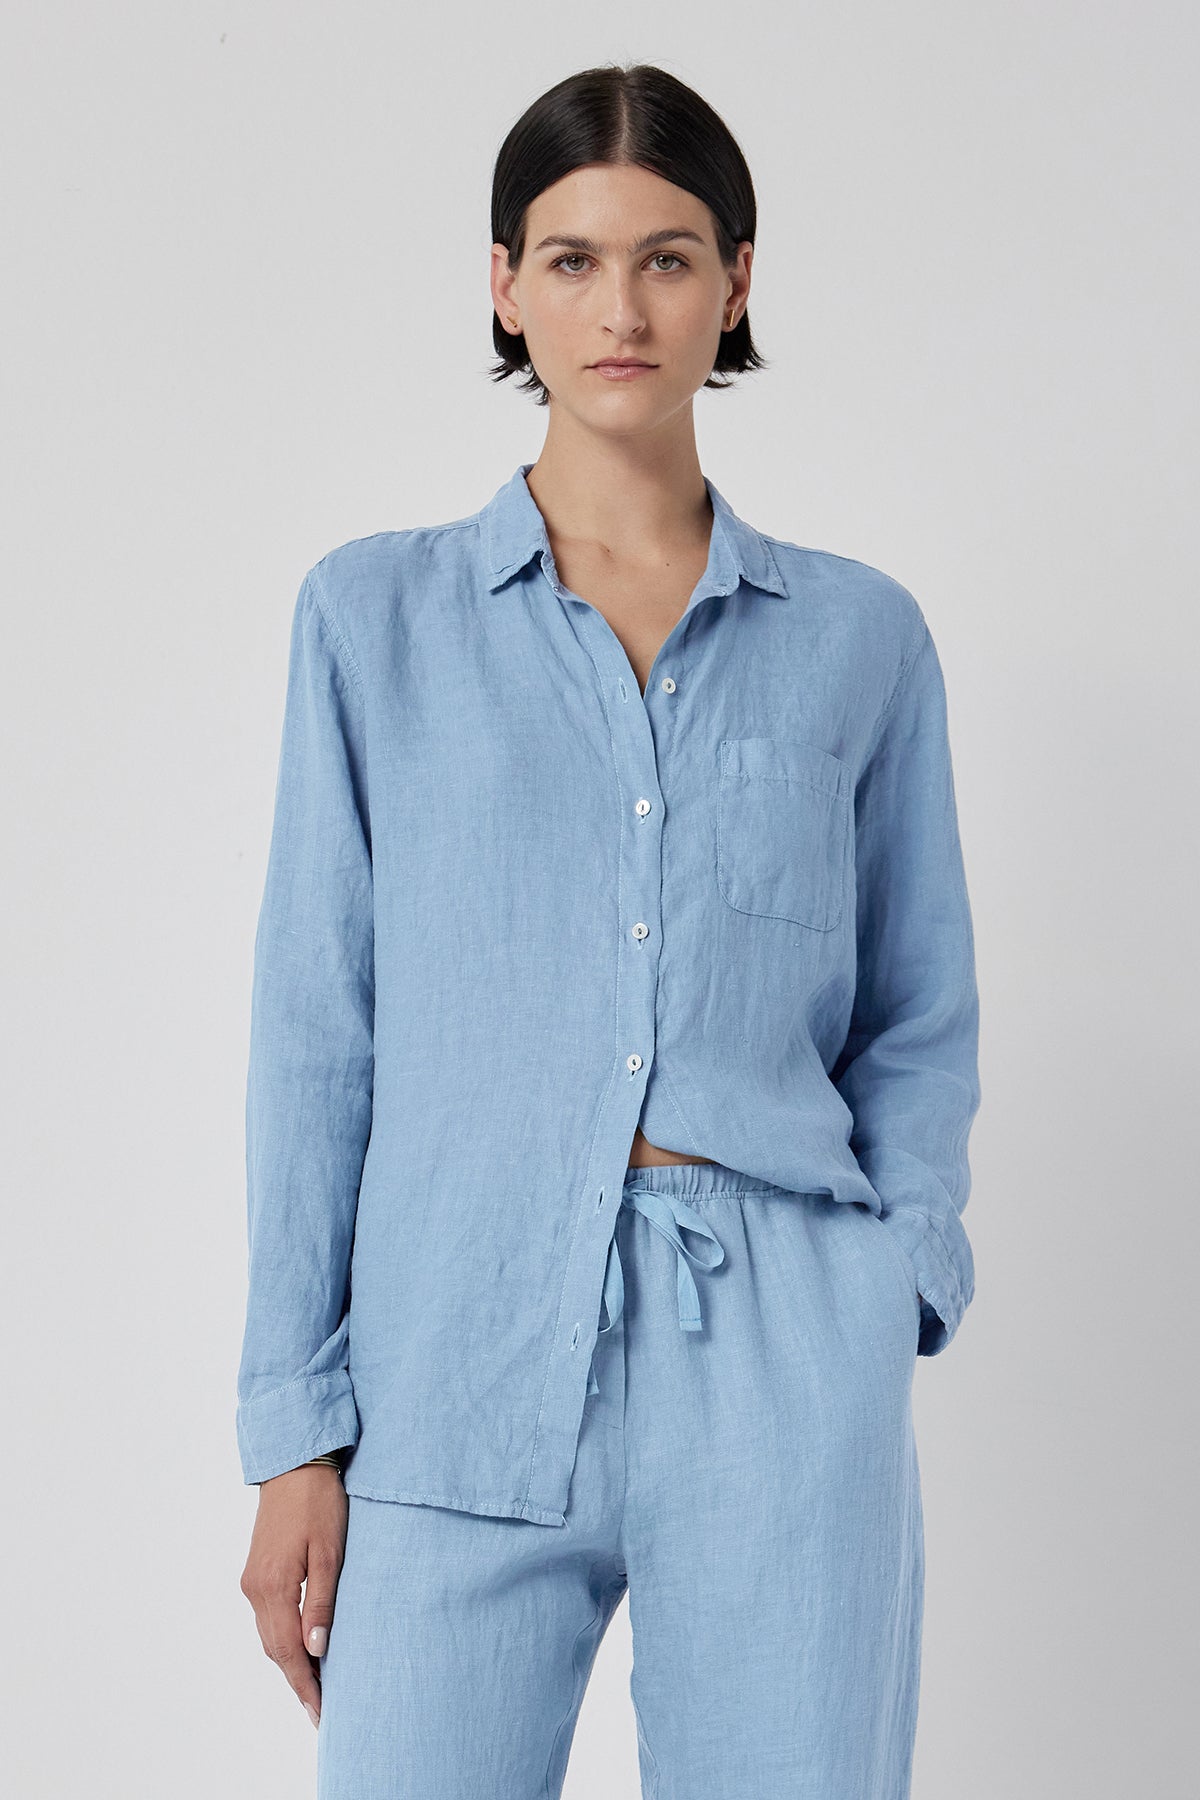   A woman wearing a blue linen Mulholland Shirt by Velvet by Jenny Graham with a relaxed silhouette and scooped hemline. 